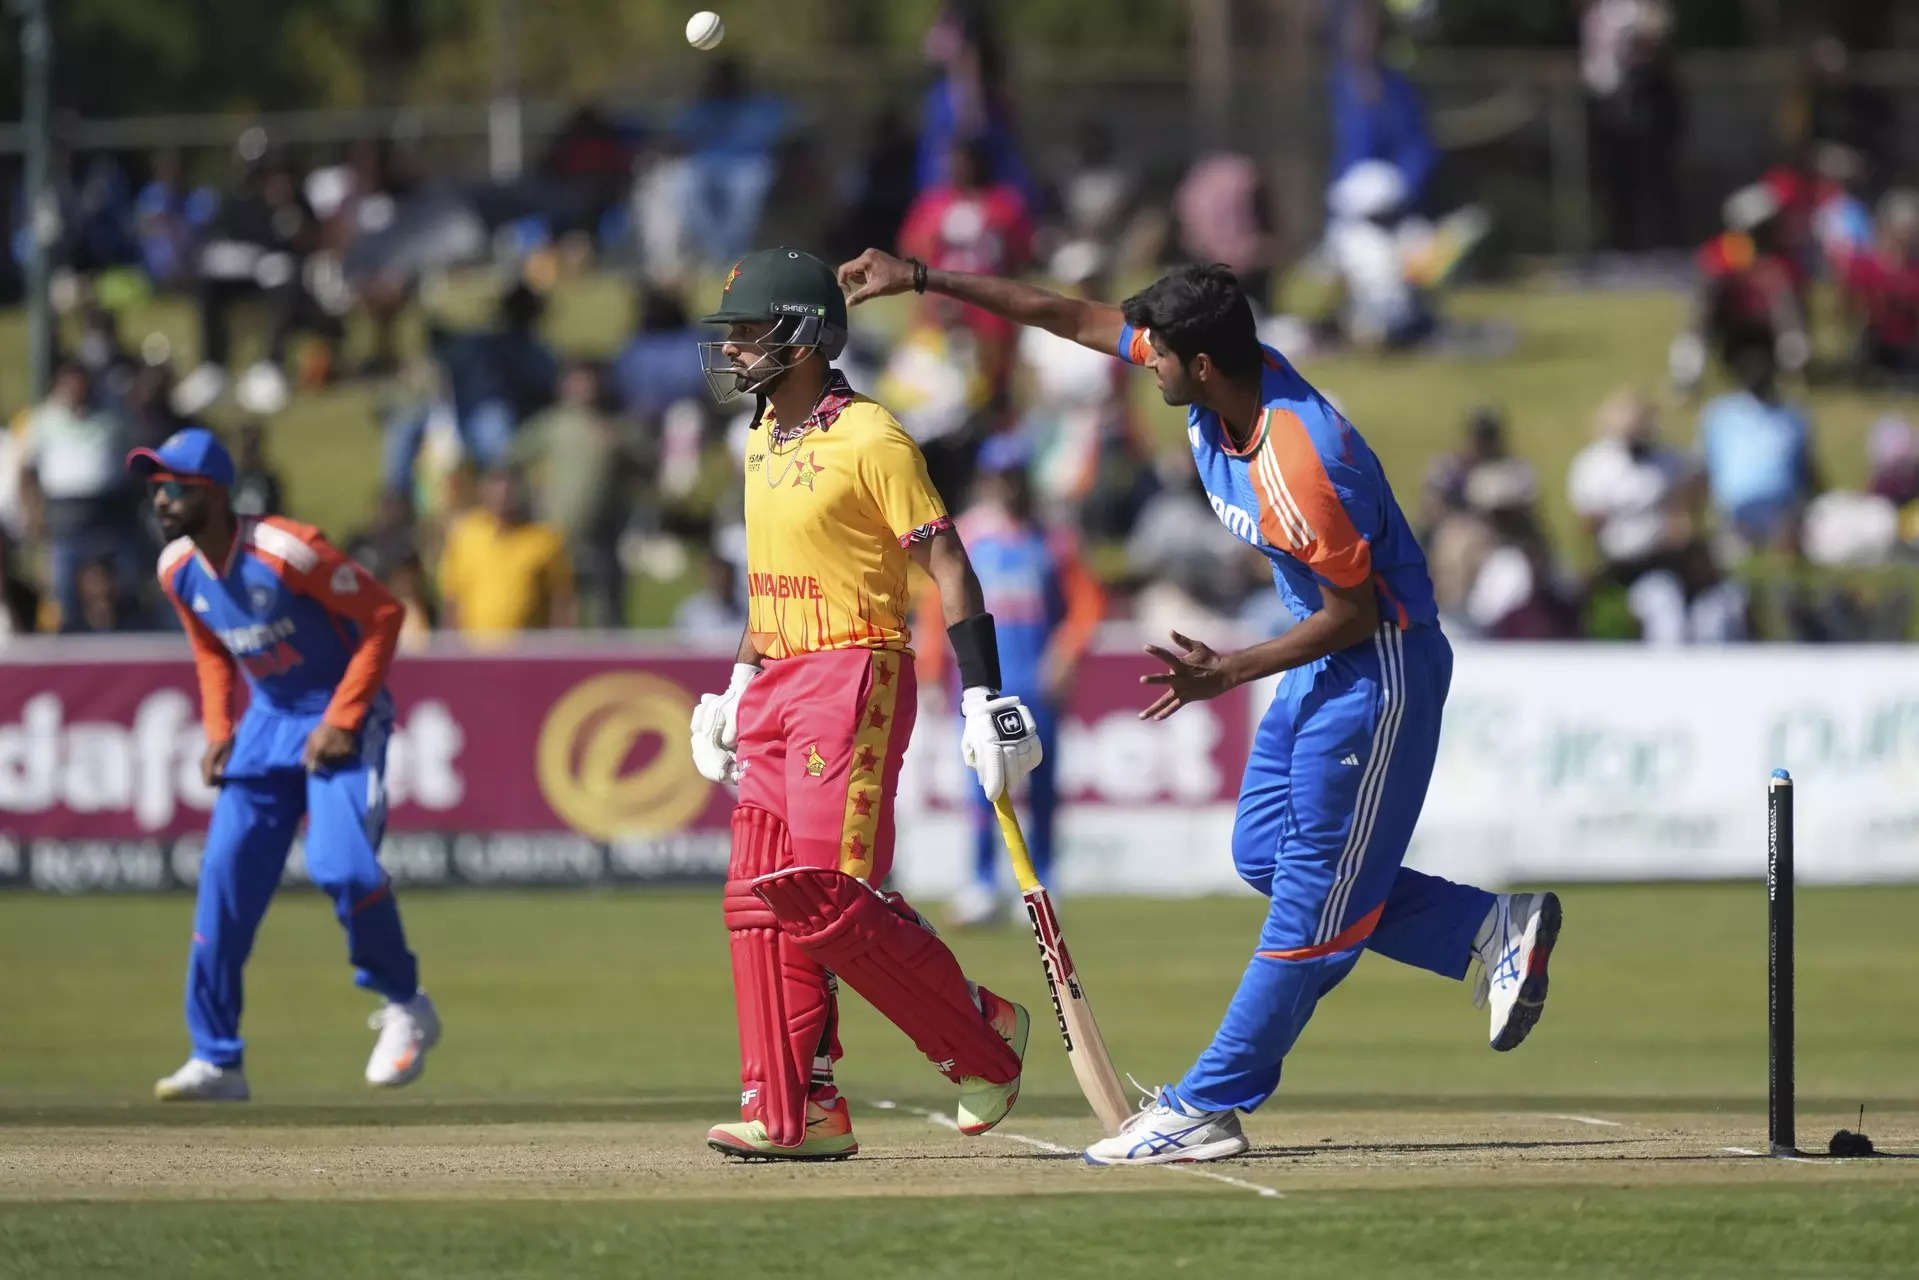 India vs Zimbabwe 3rd T20 Live Score: India look to take lead in the series 